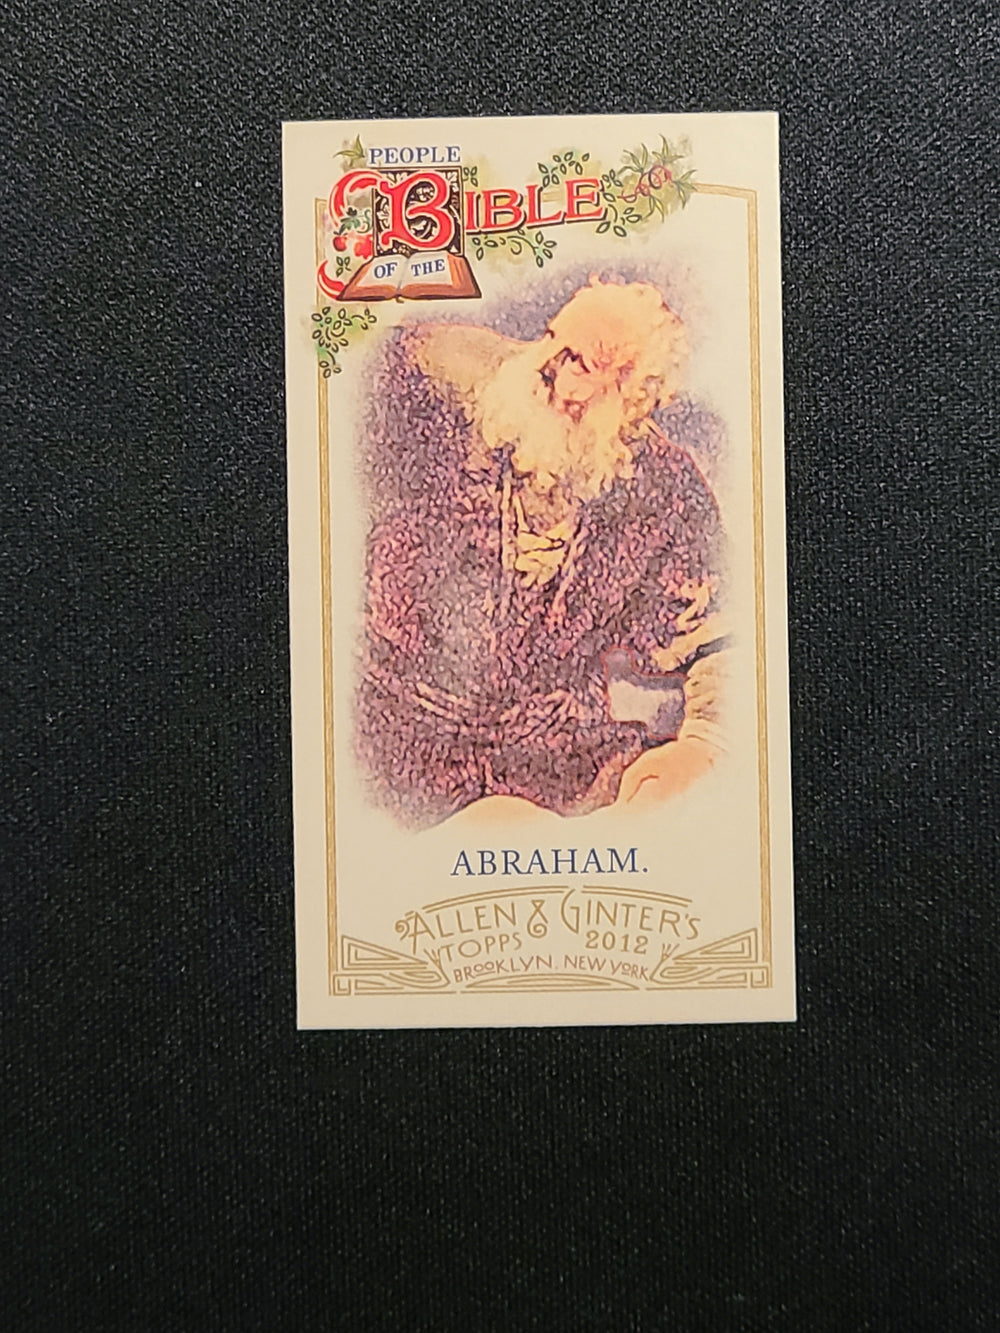 2011 Topps Allen & Ginter's Mini People of the Bible PB-3 Abraham